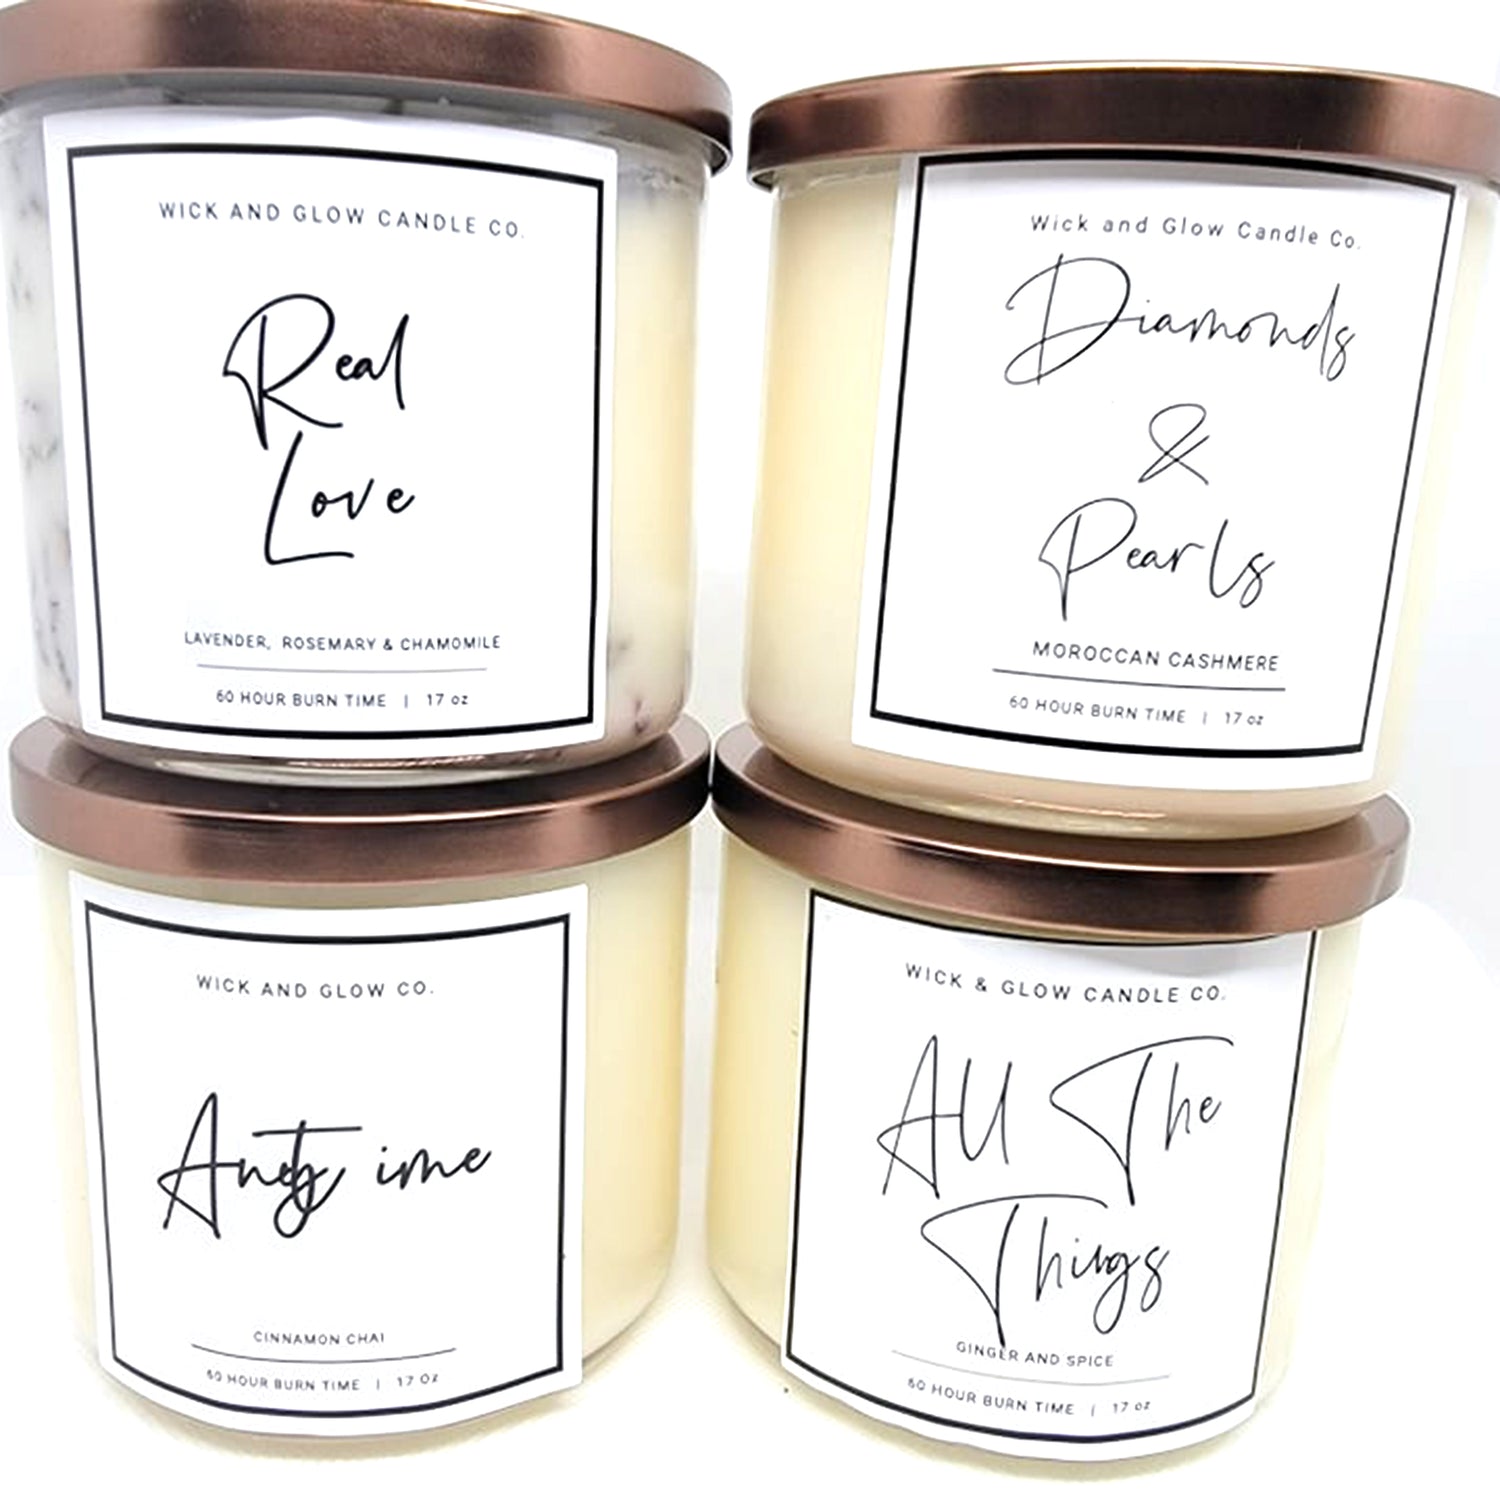 The 3 Wick Luxury Scented Candle Collection